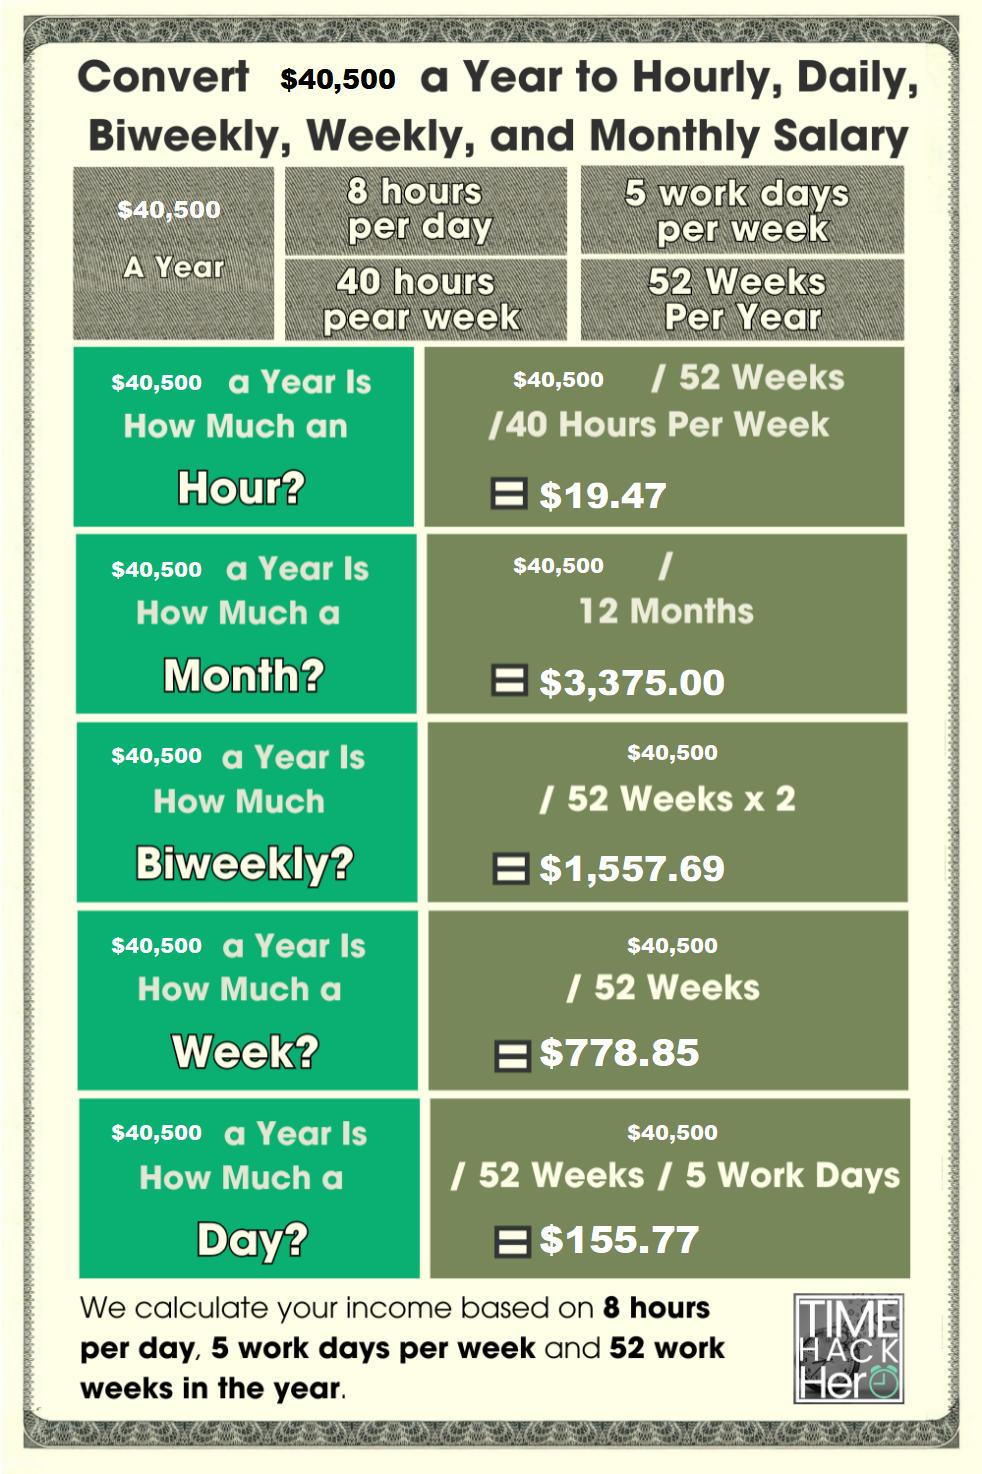 Convert $40500 a Year to Hourly, Daily, Biweekly, Weekly, and Monthly Salary